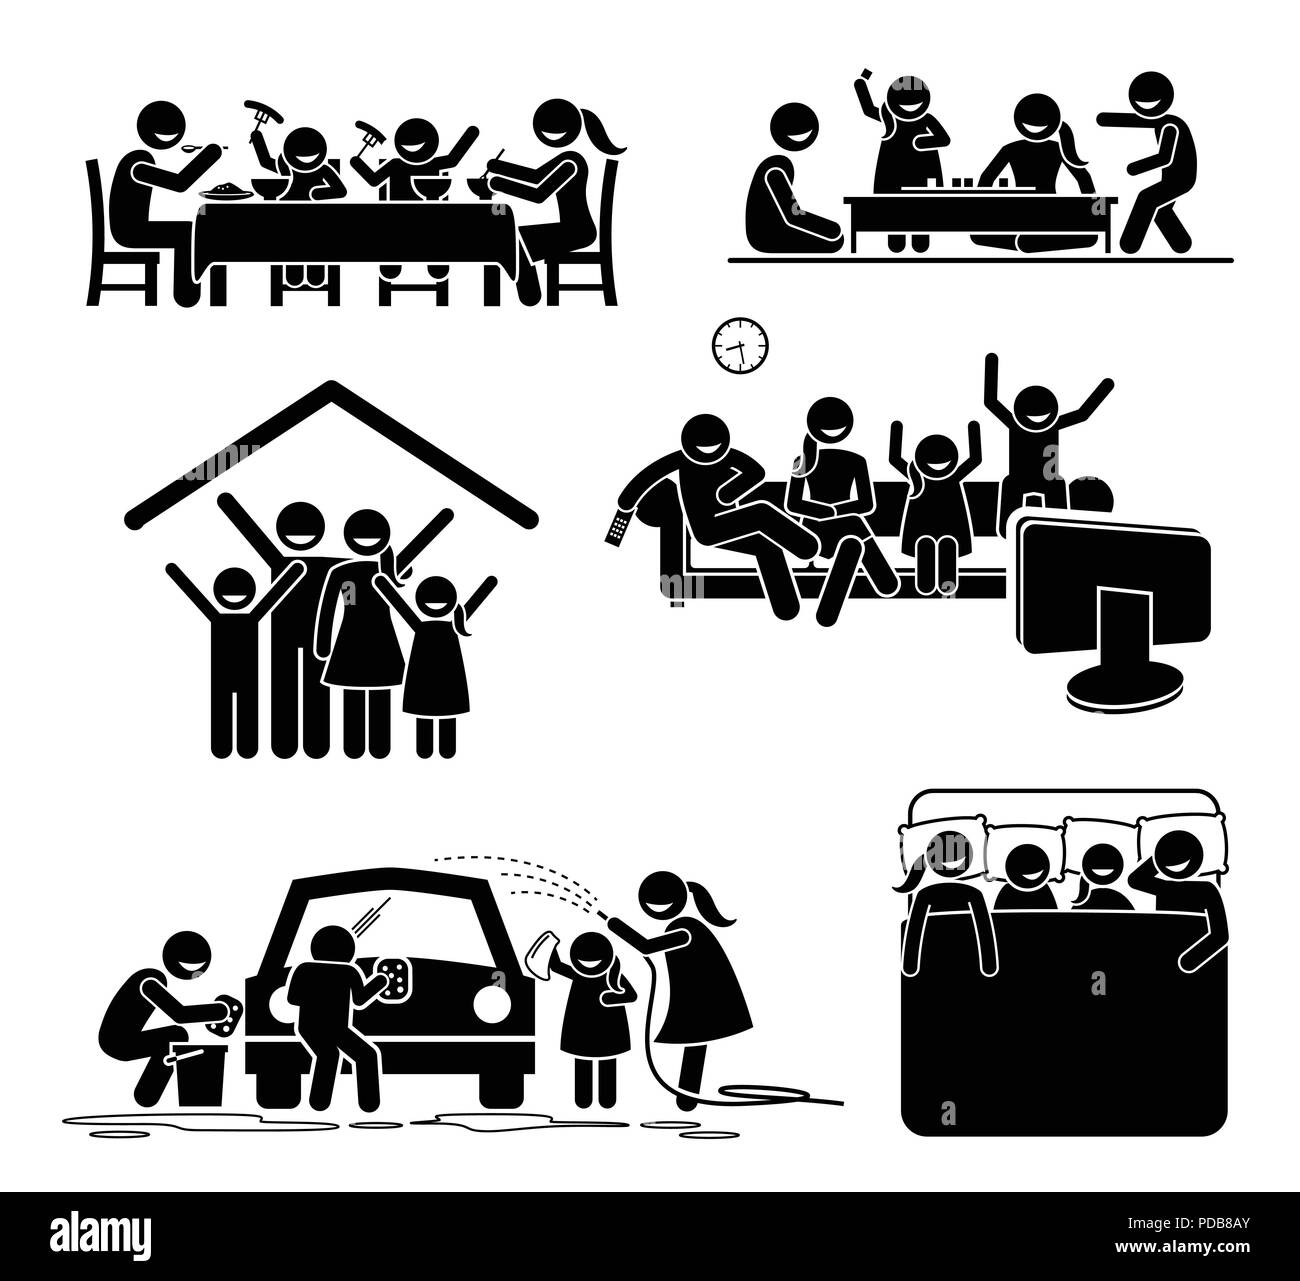 Family activities time at home. Stick figures pictogram depict family having meal, playing board games, watching TV, and washing car. Stock Vector